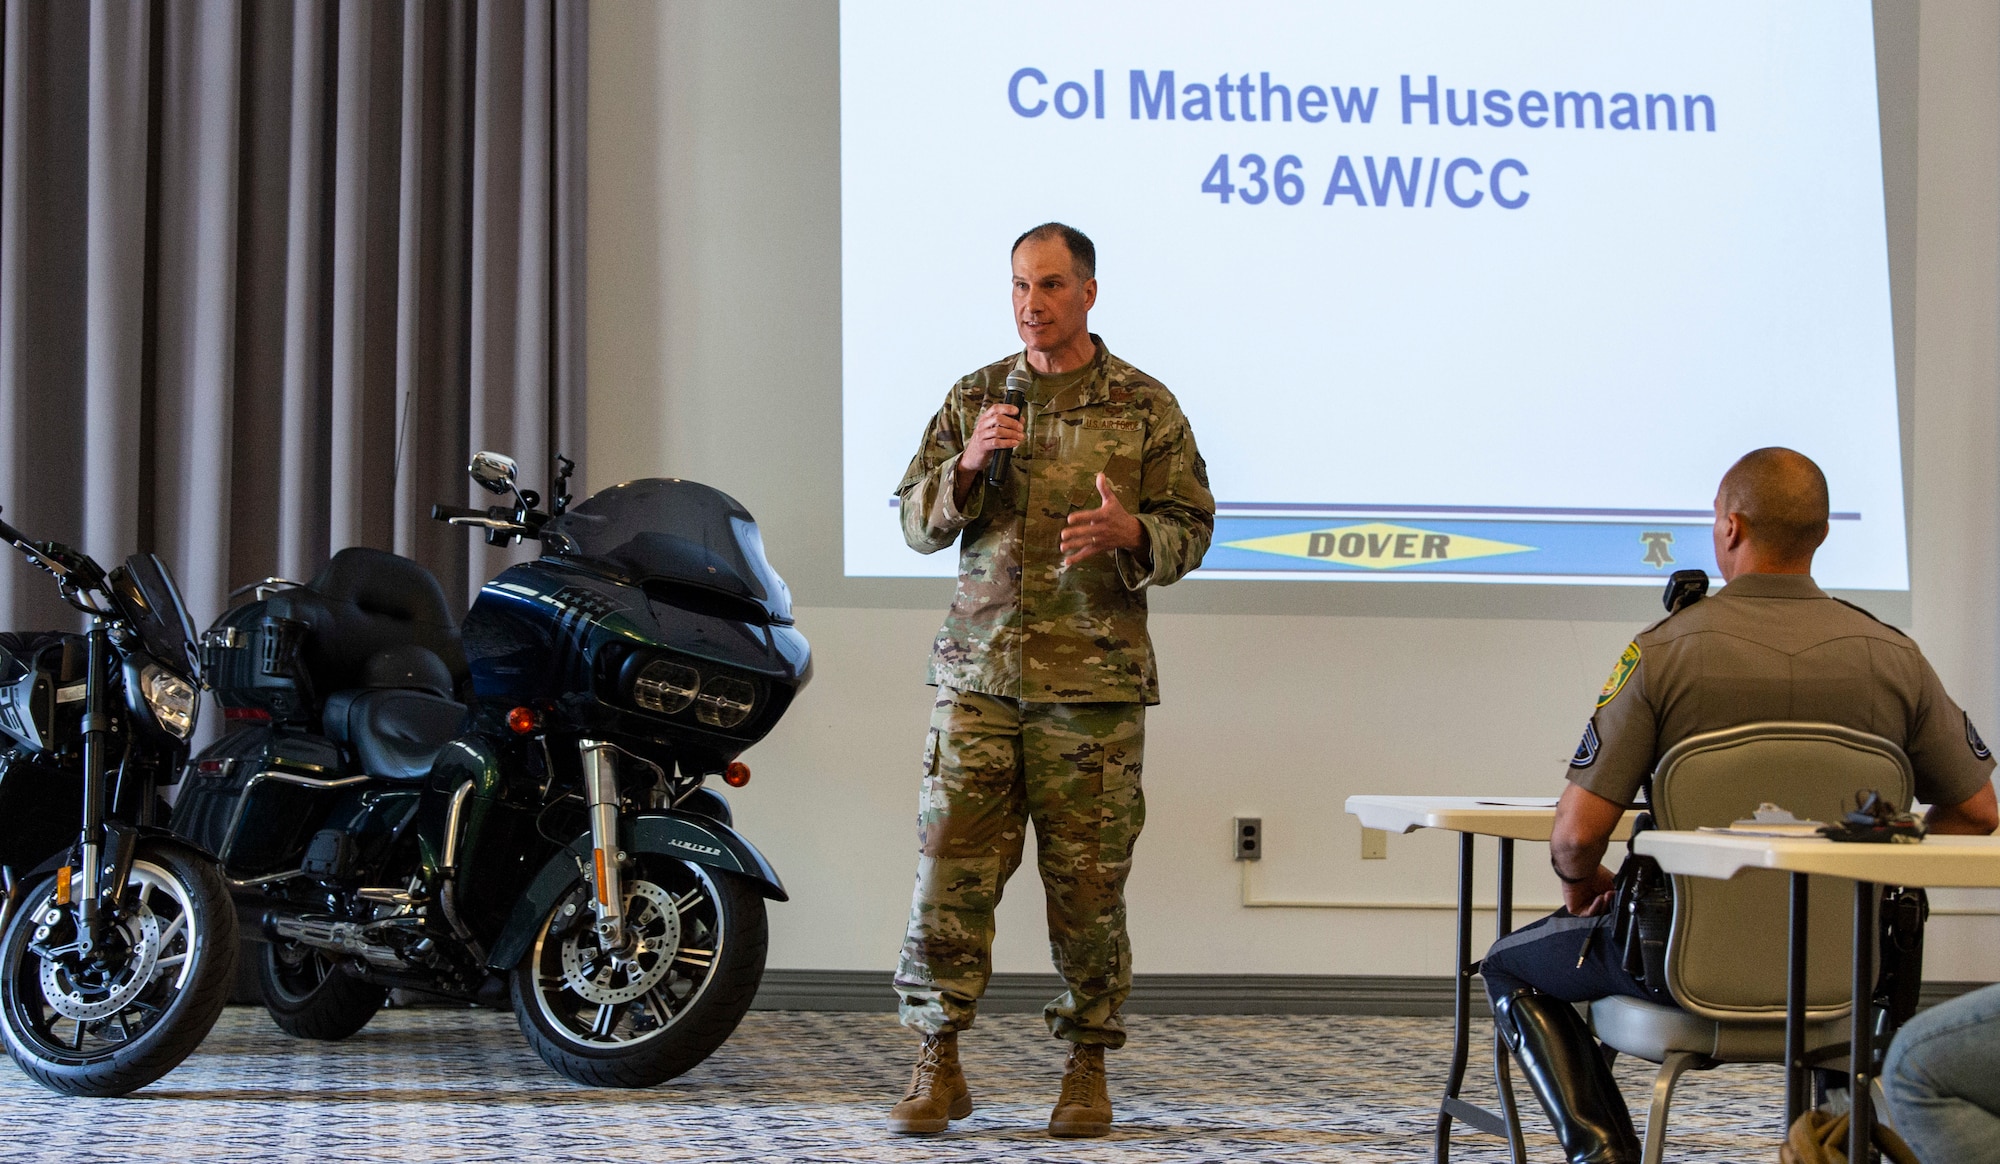 Col. Matt Husemann, 436th Airlift Wing commander, makes opening remarks during the 2022 Motorcycle Safety Day briefing held at The Landings on Dover Air Force Base, Delaware, April 29, 2022. Organized by the 436th AW Safety Office, “The Message of Mentorship” was this year’s theme as riders listened to numerous guest speakers, received refresher training, observed motorcycle demonstrations and participated in a planned ride throughout central Delaware. (U.S. Air Force photo by Roland Balik)